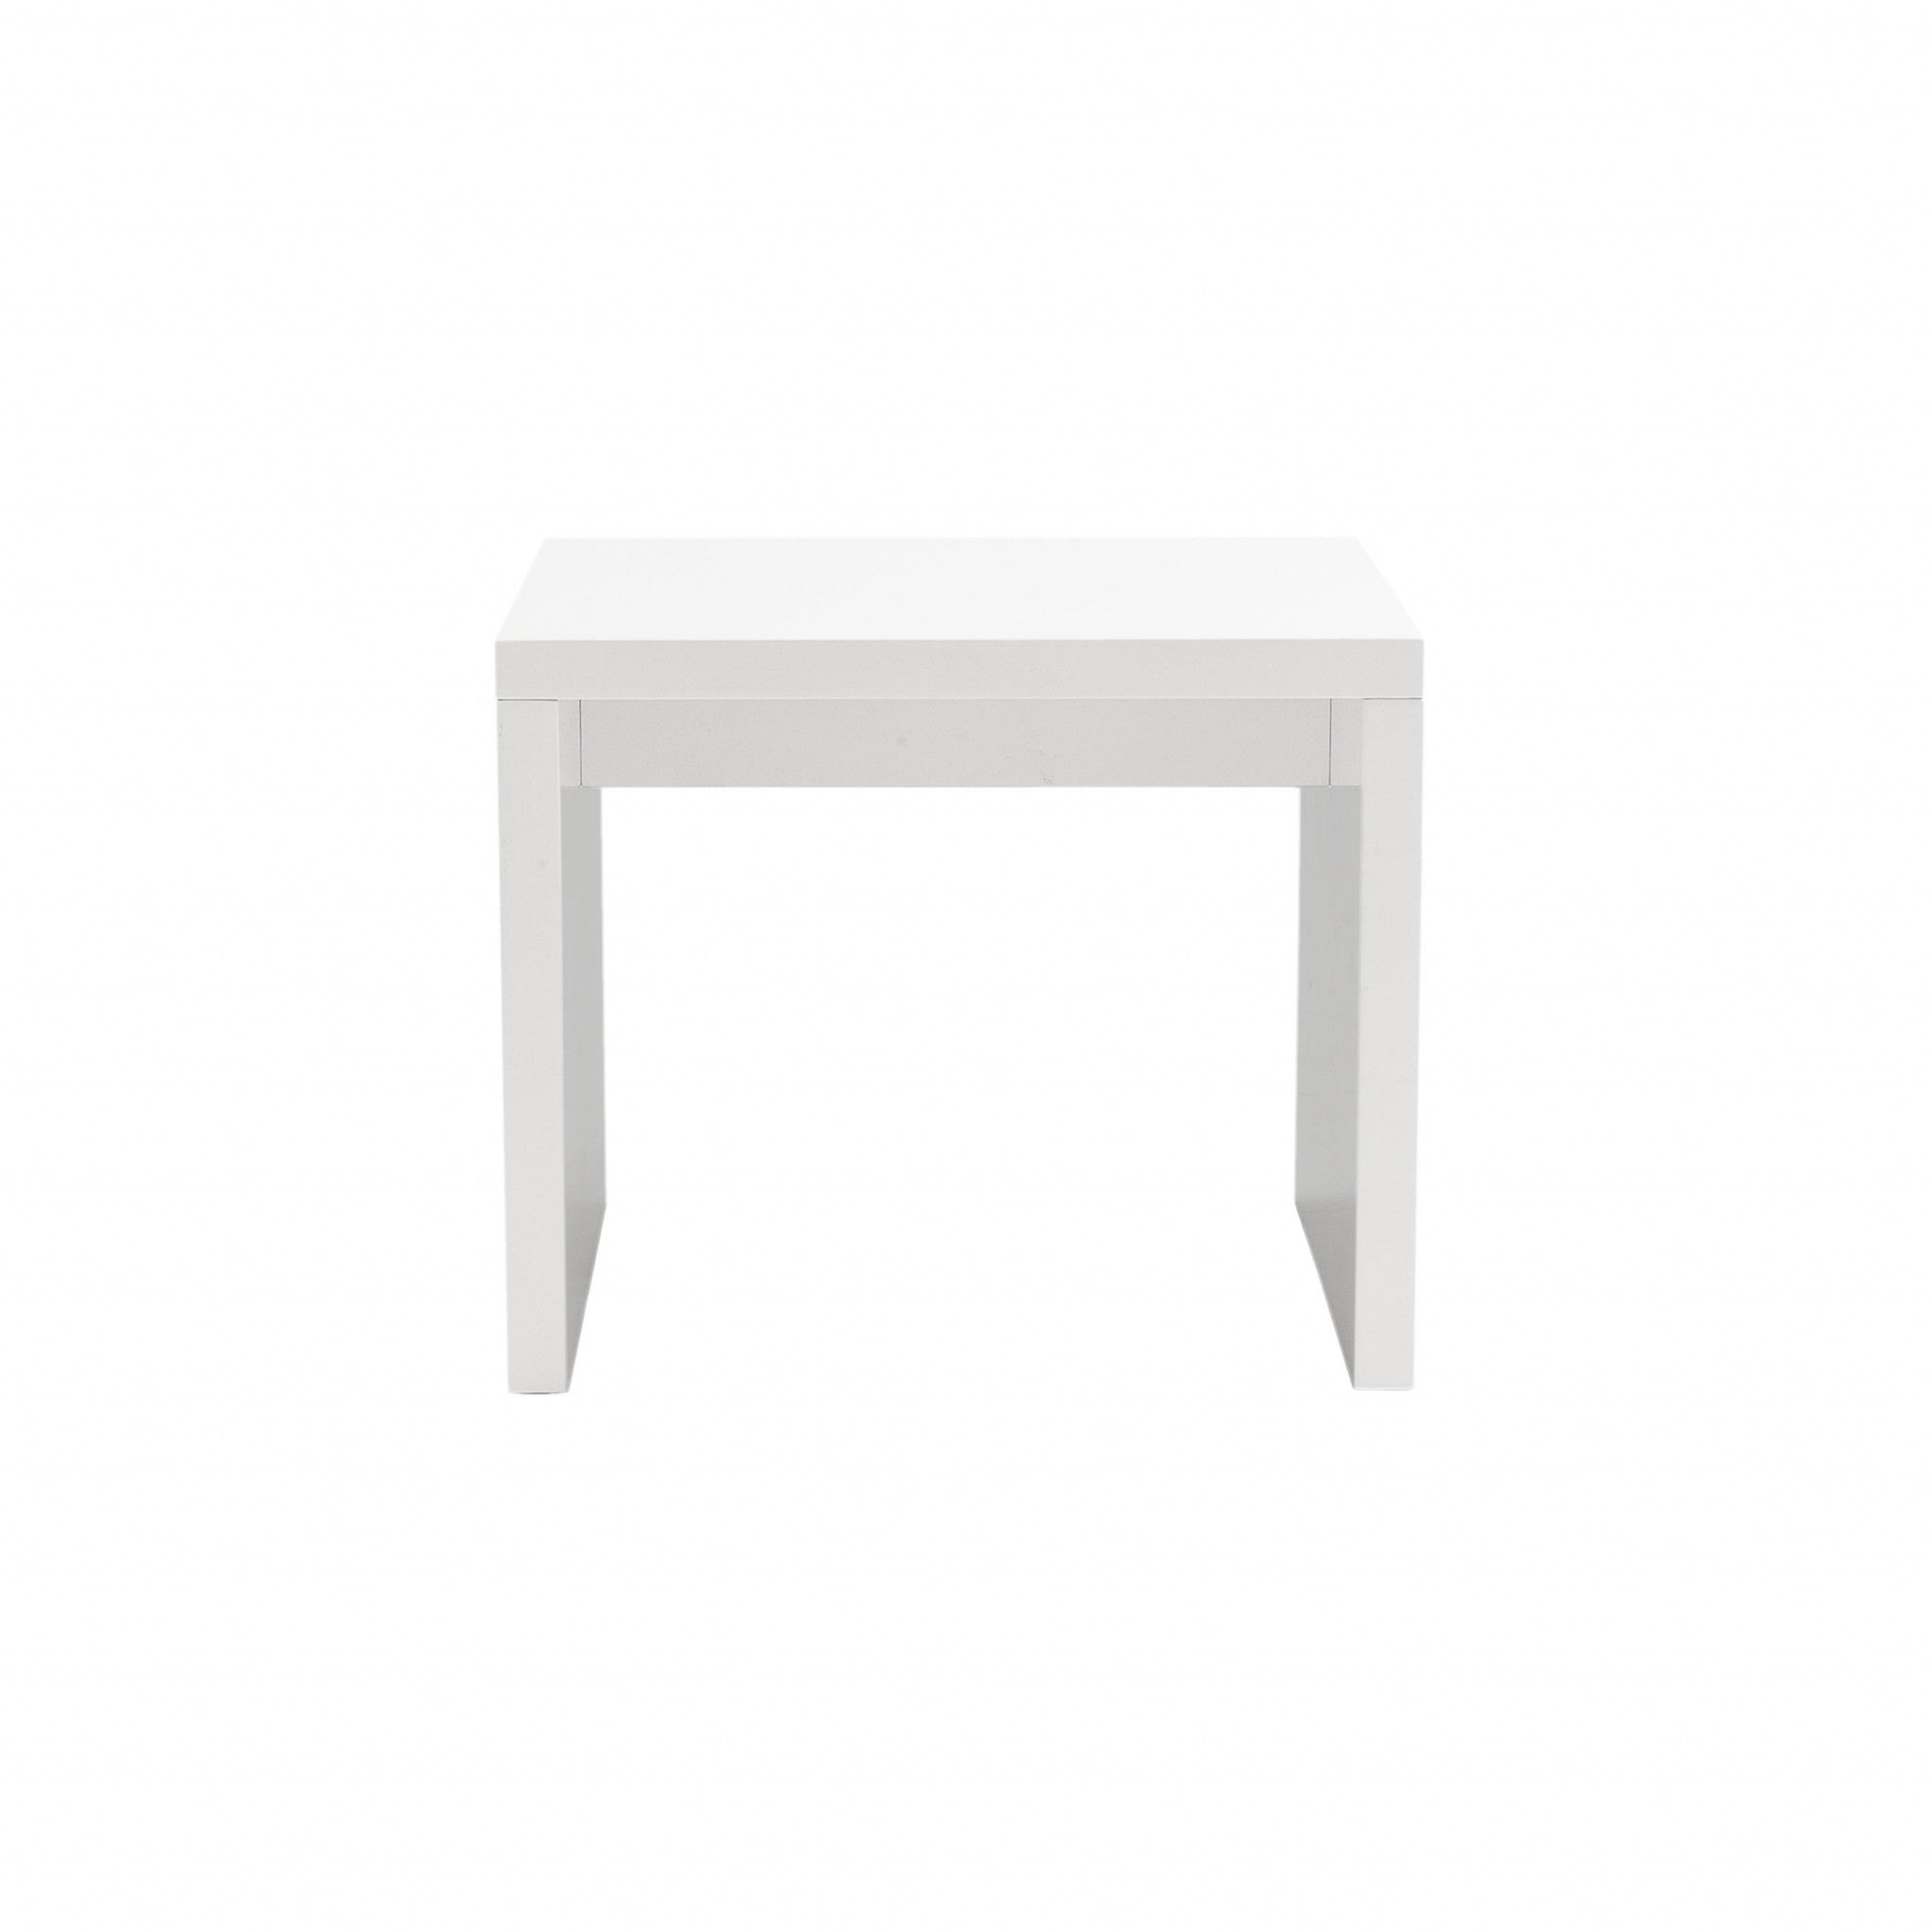 20" White Square End Table